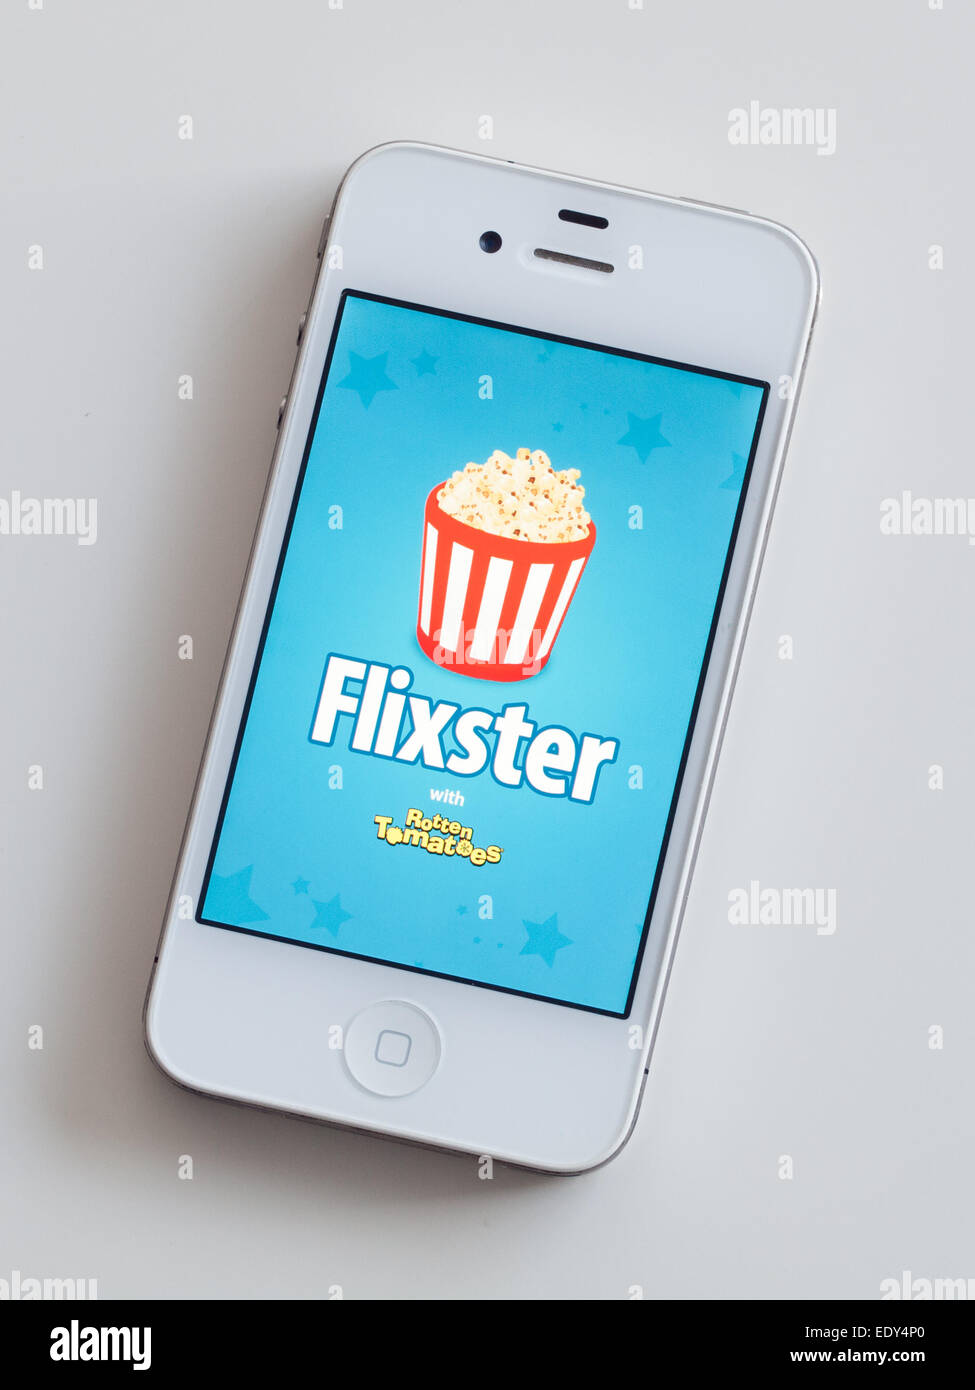 The homescreen and logo of the Flixster with Rotten Tomatoes mobile app on  a white Apple iPhone 4 Stock Photo - Alamy